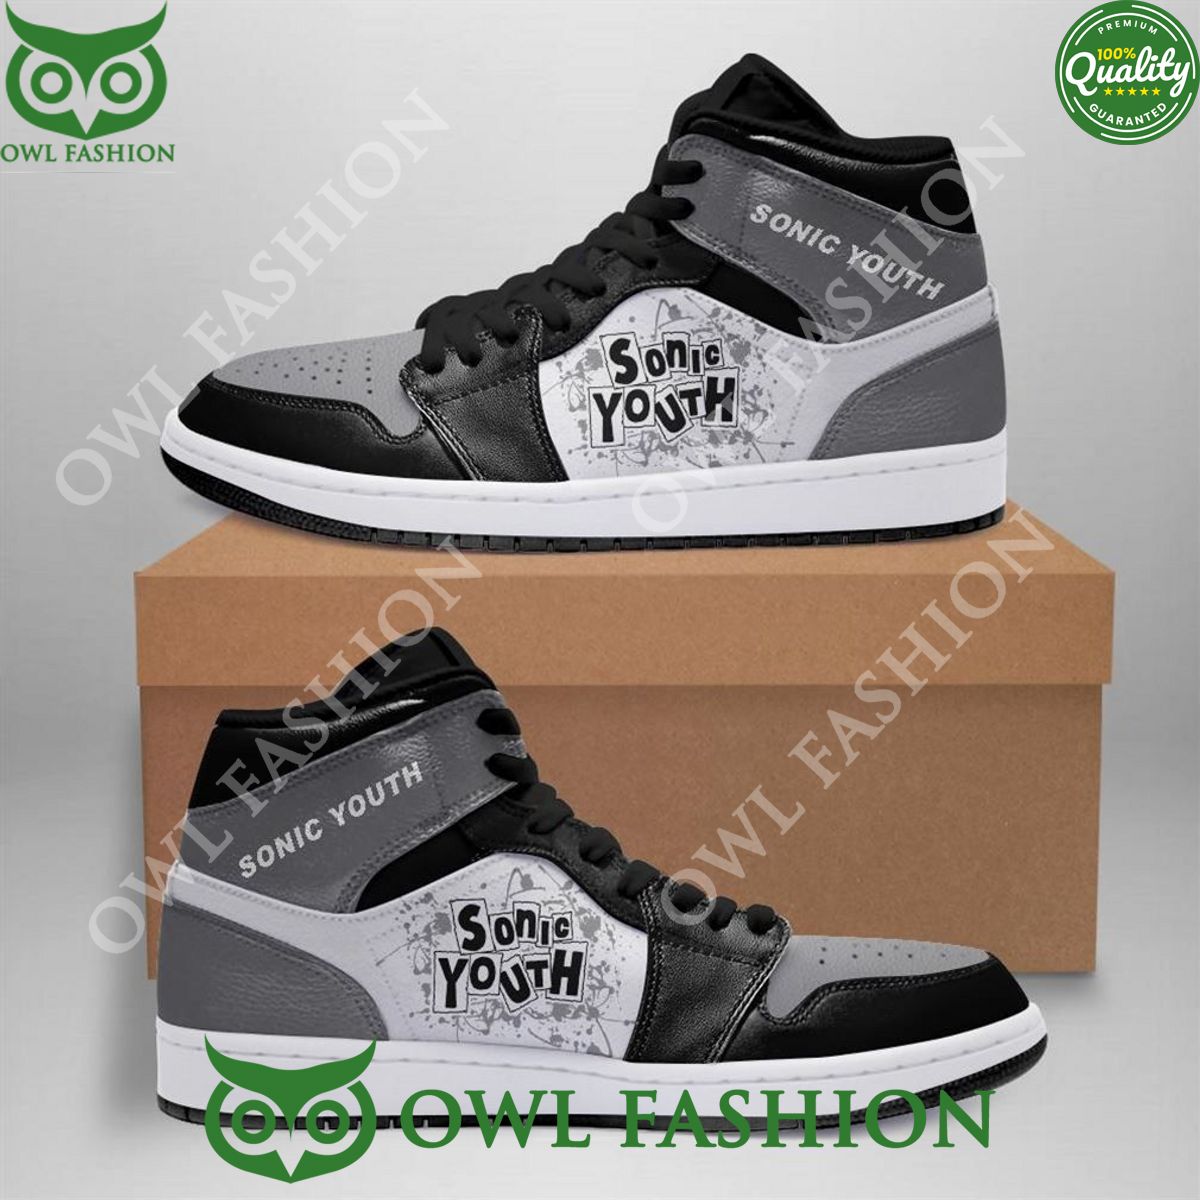 Sonic Youth Rock Band Music Air Jordan Sneaker Boots Shoes